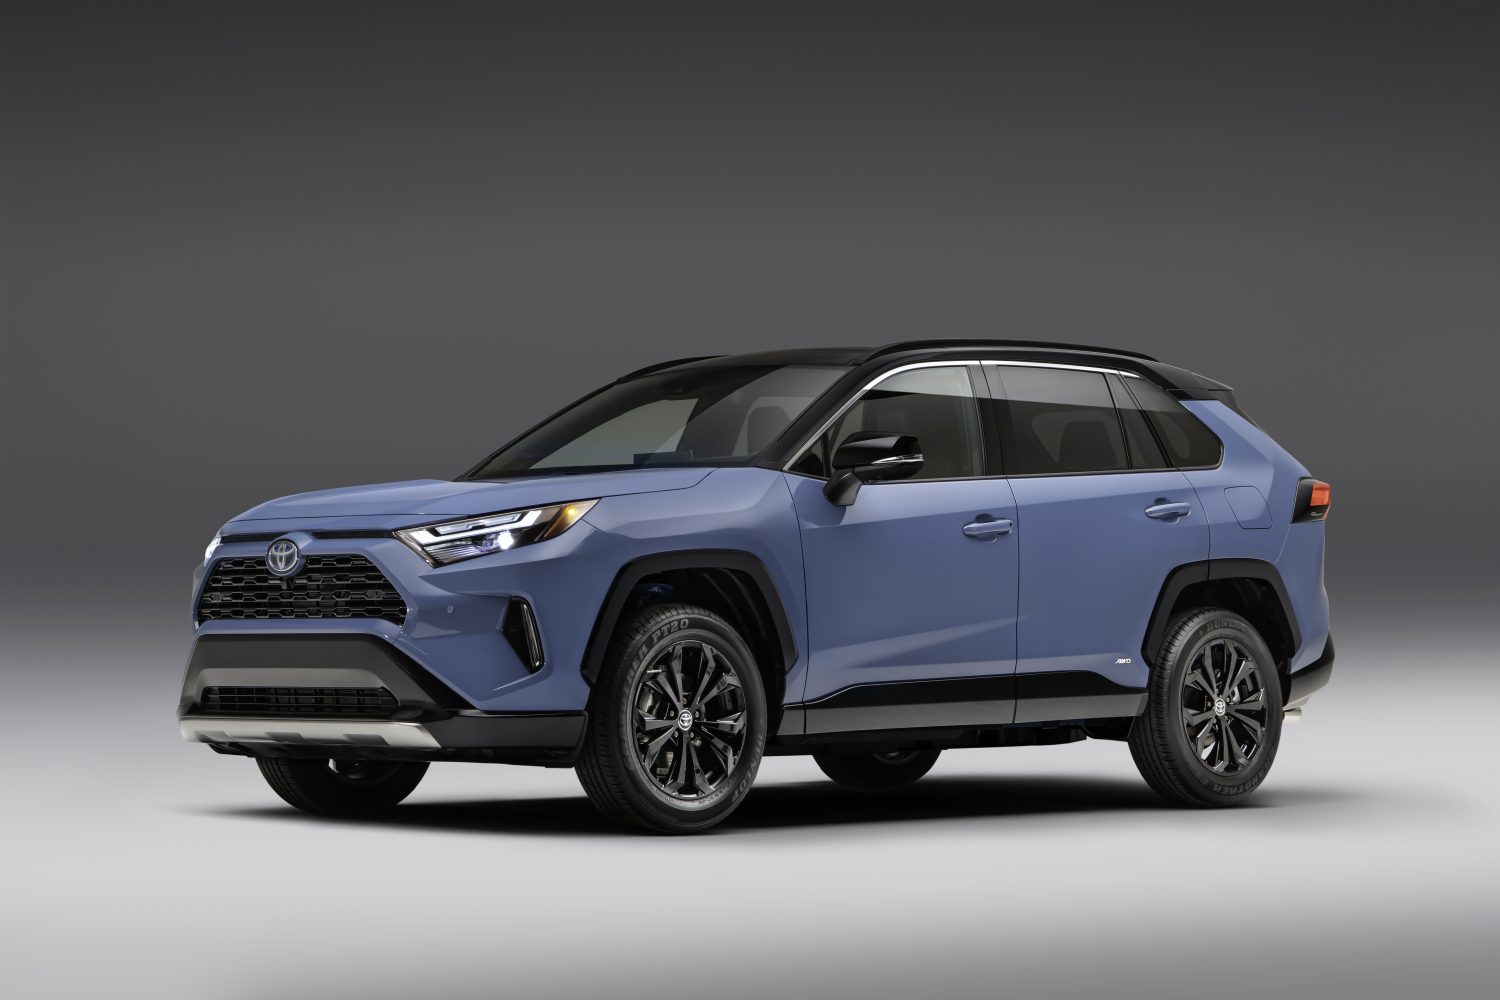 A blue 2022 Toyota RAV4 against a gray background., when is the best time to buy an SUV